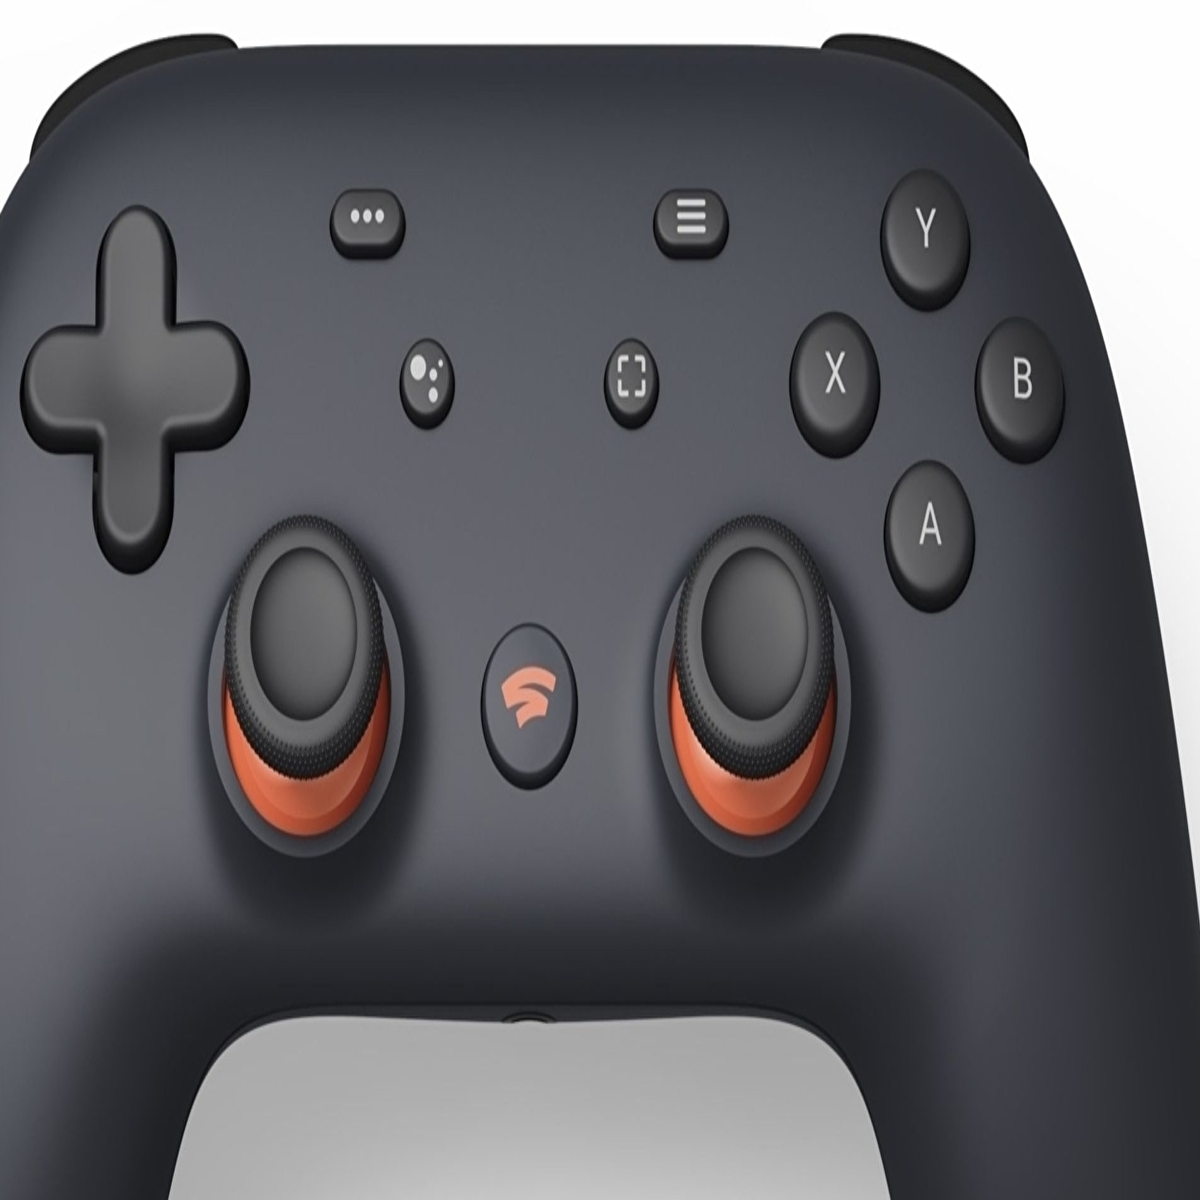 Google's Overpriced Game Pricing Adds to Stadia Launch Disaster